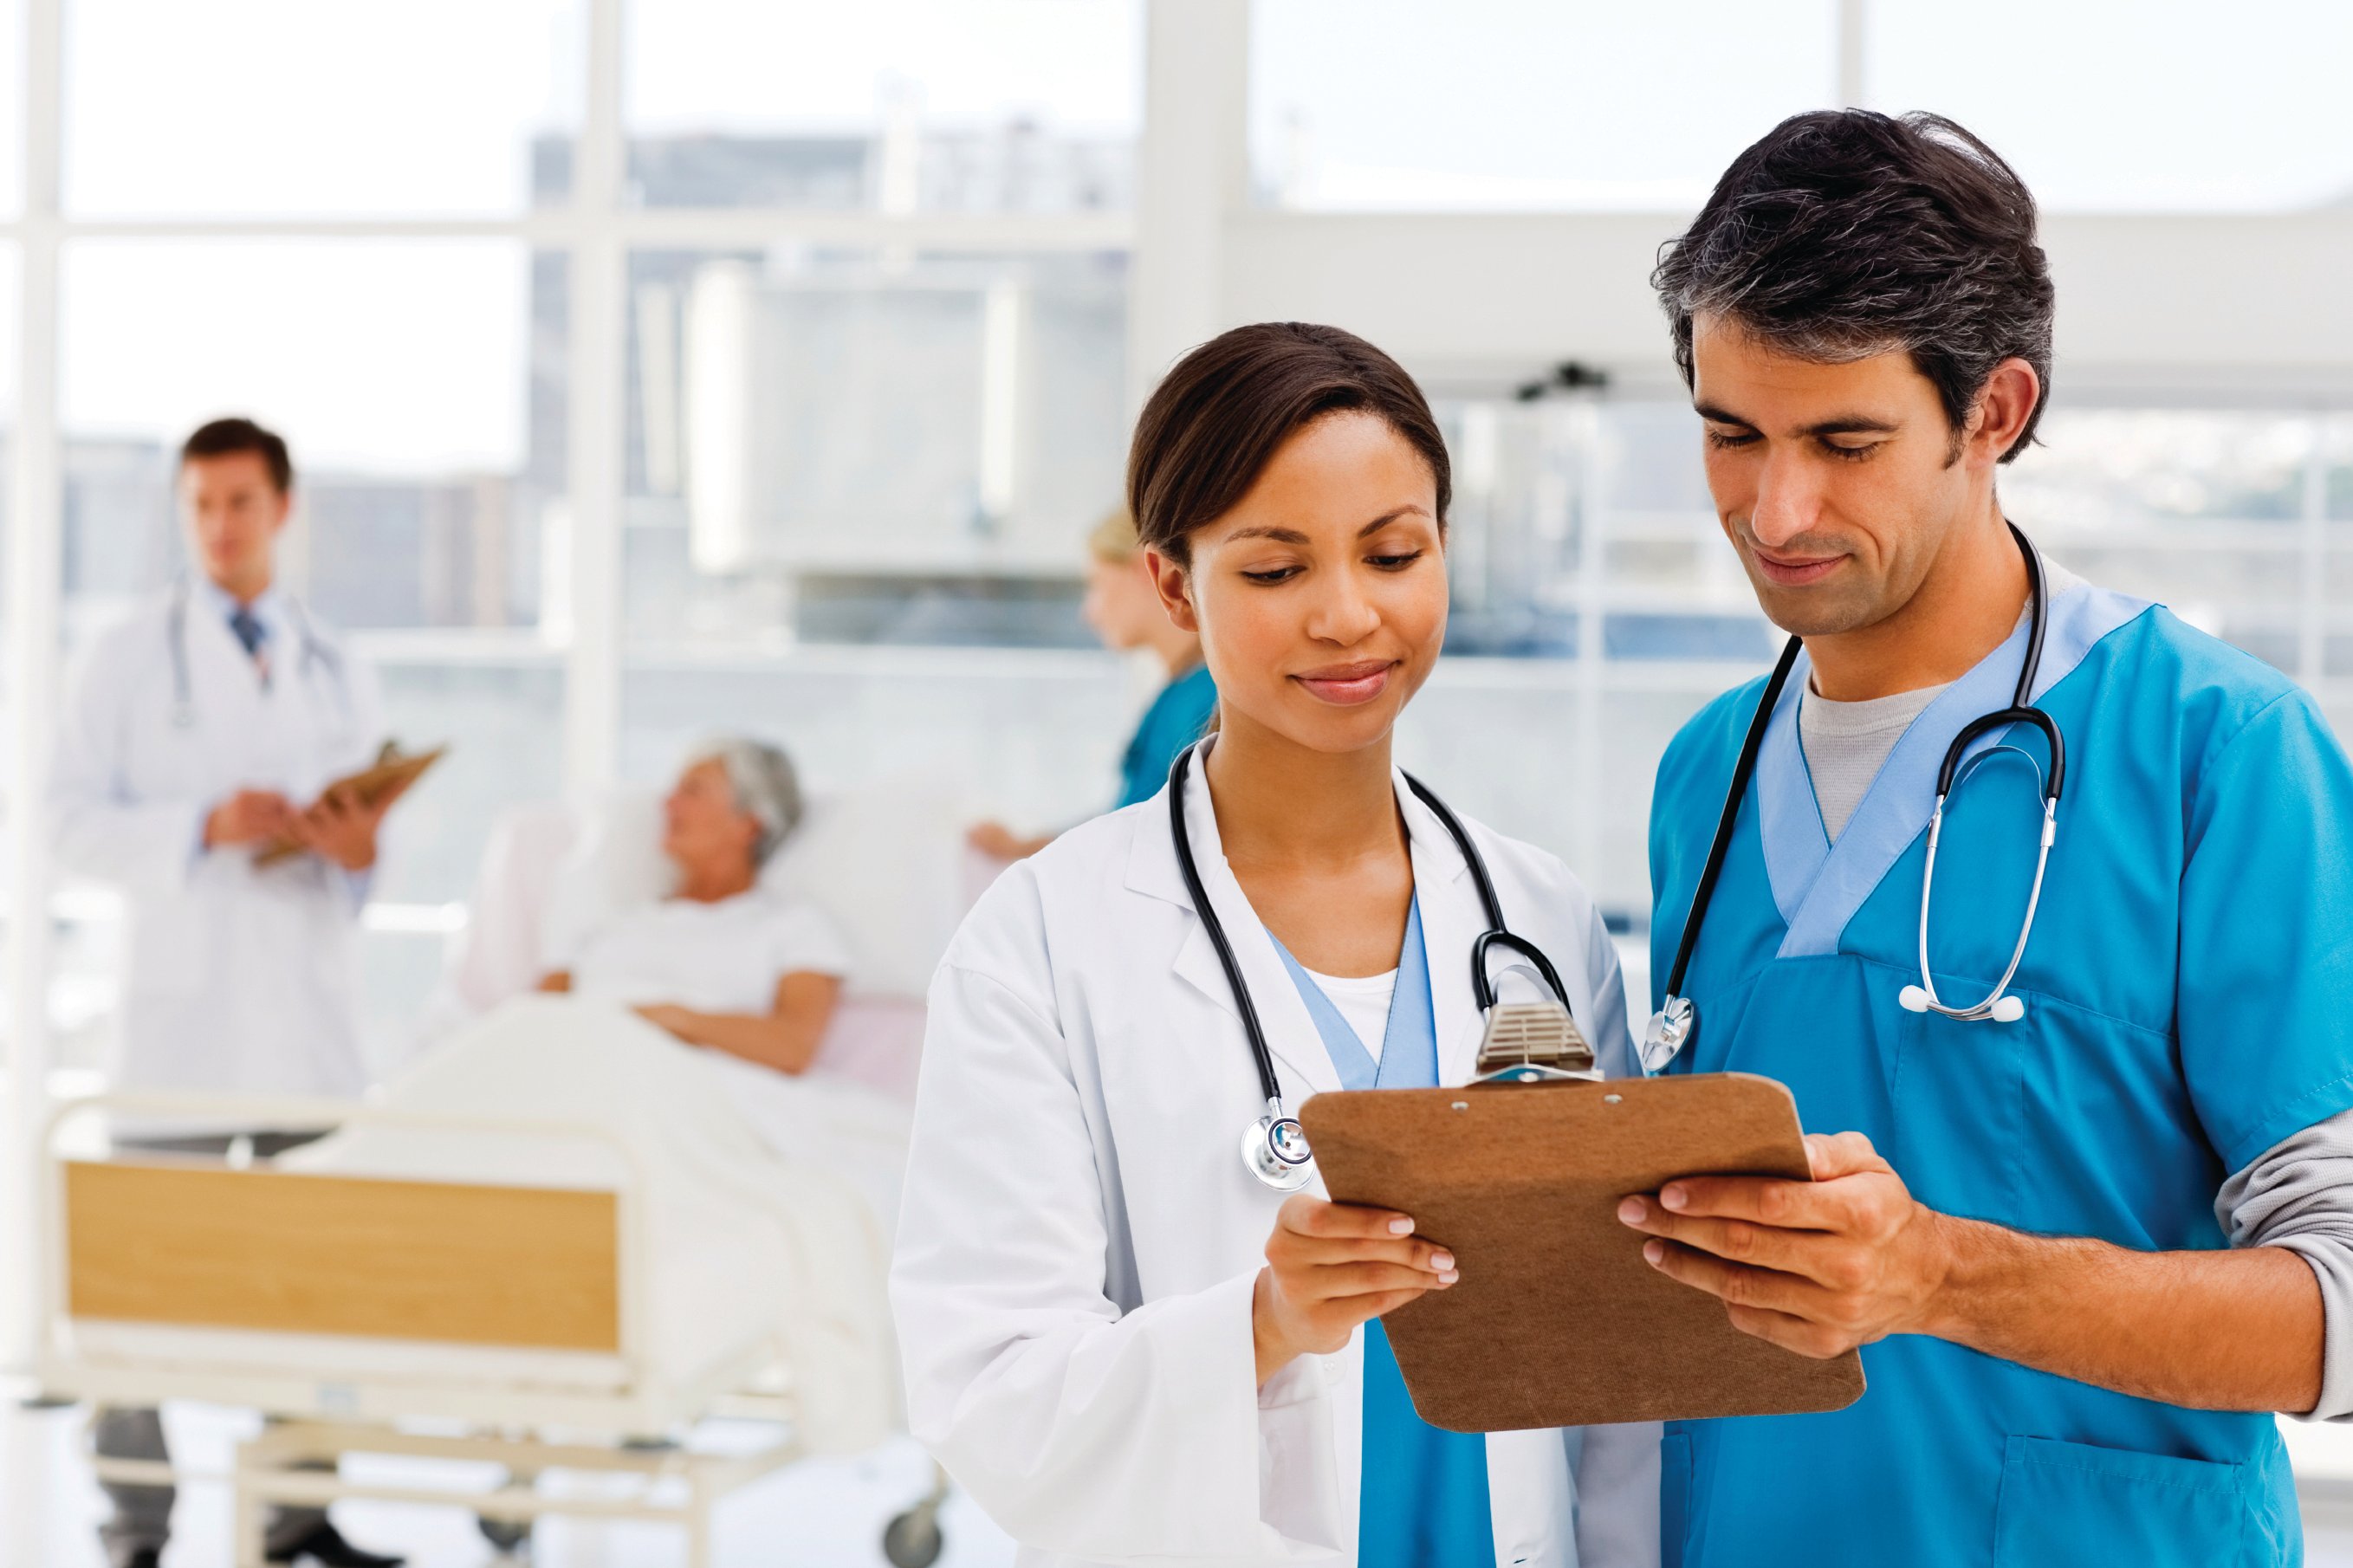 Two hospitalists look over a clipboard